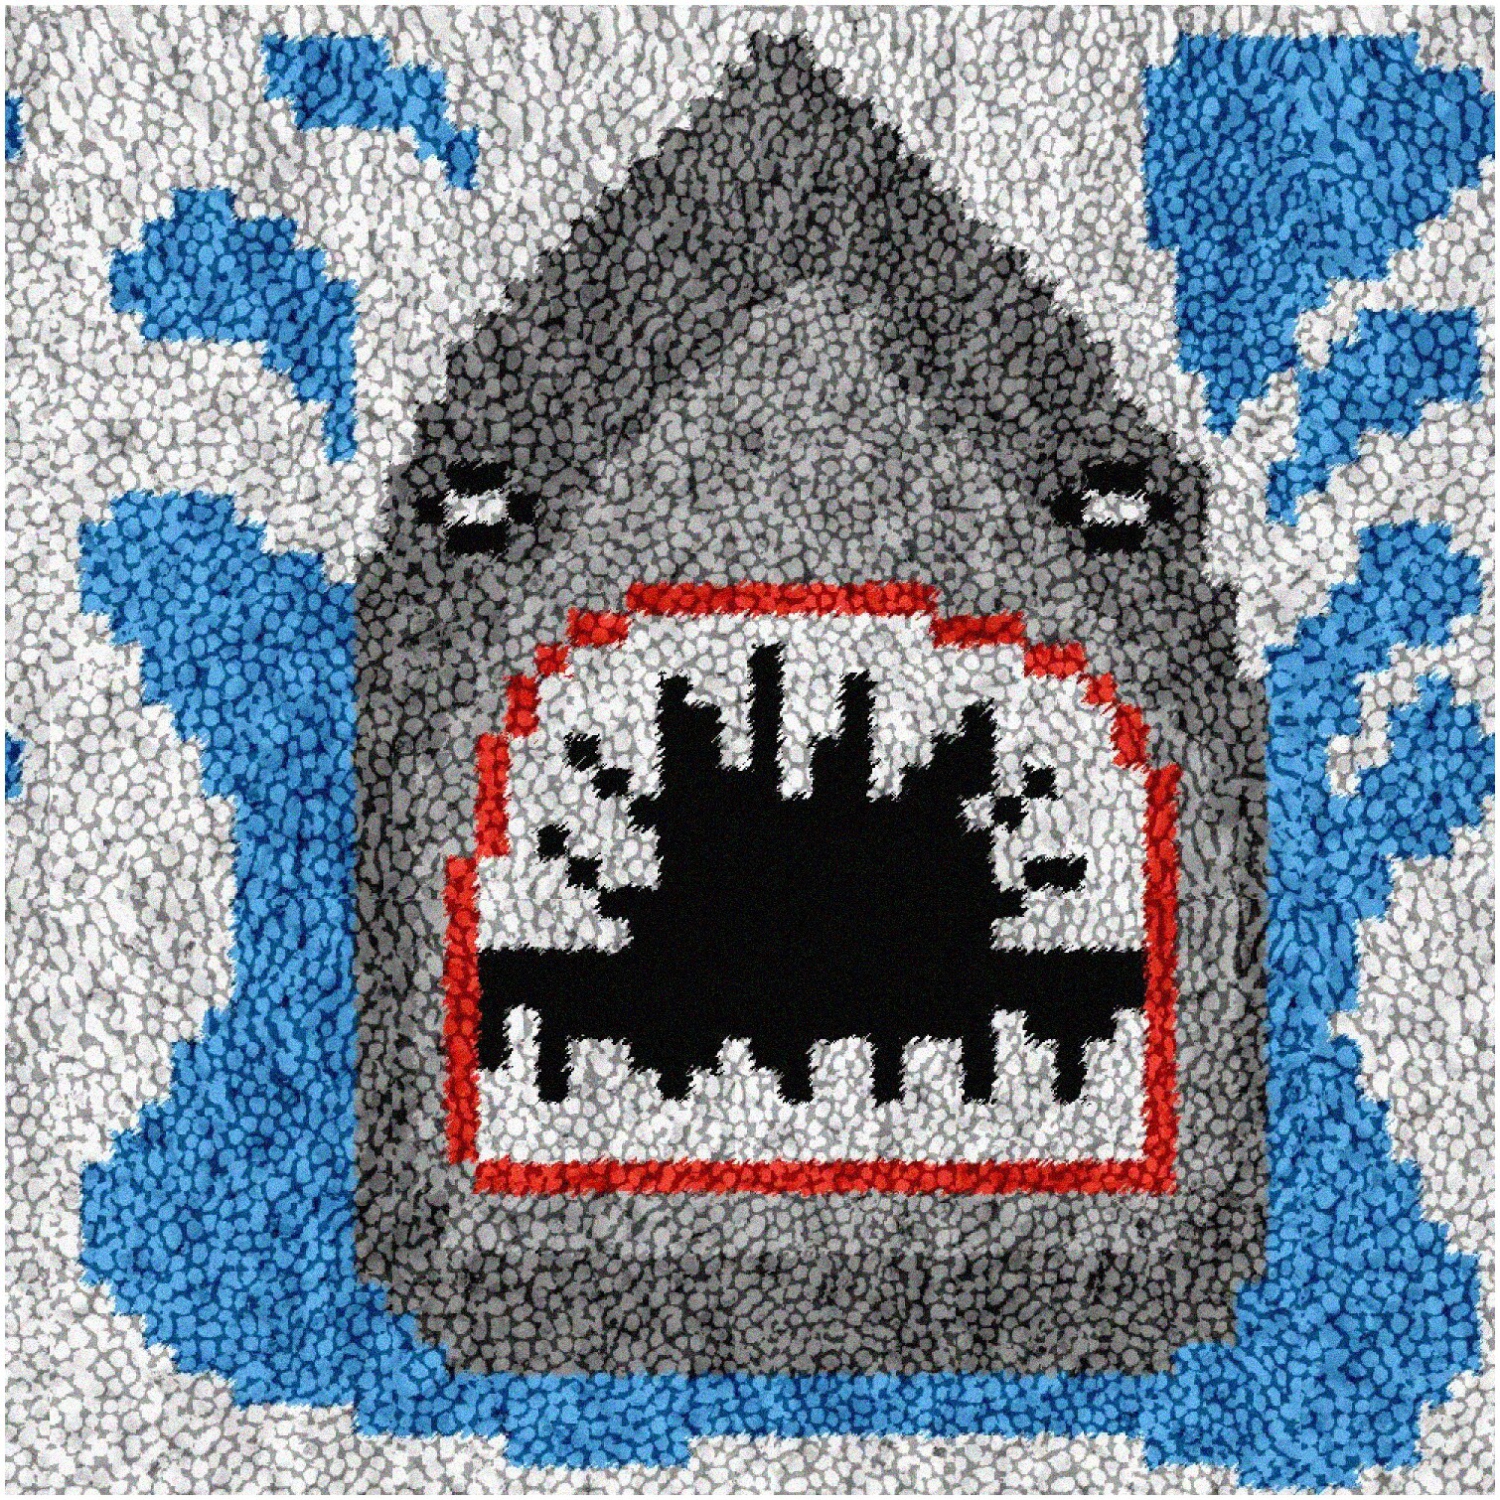 Sharky Hooked Rug Kit - DIY Cartoon Carpet for Kids with Latch Hook, Crochet Yarn, and Embroidery Needlework - 30x30cm Home Decor Project